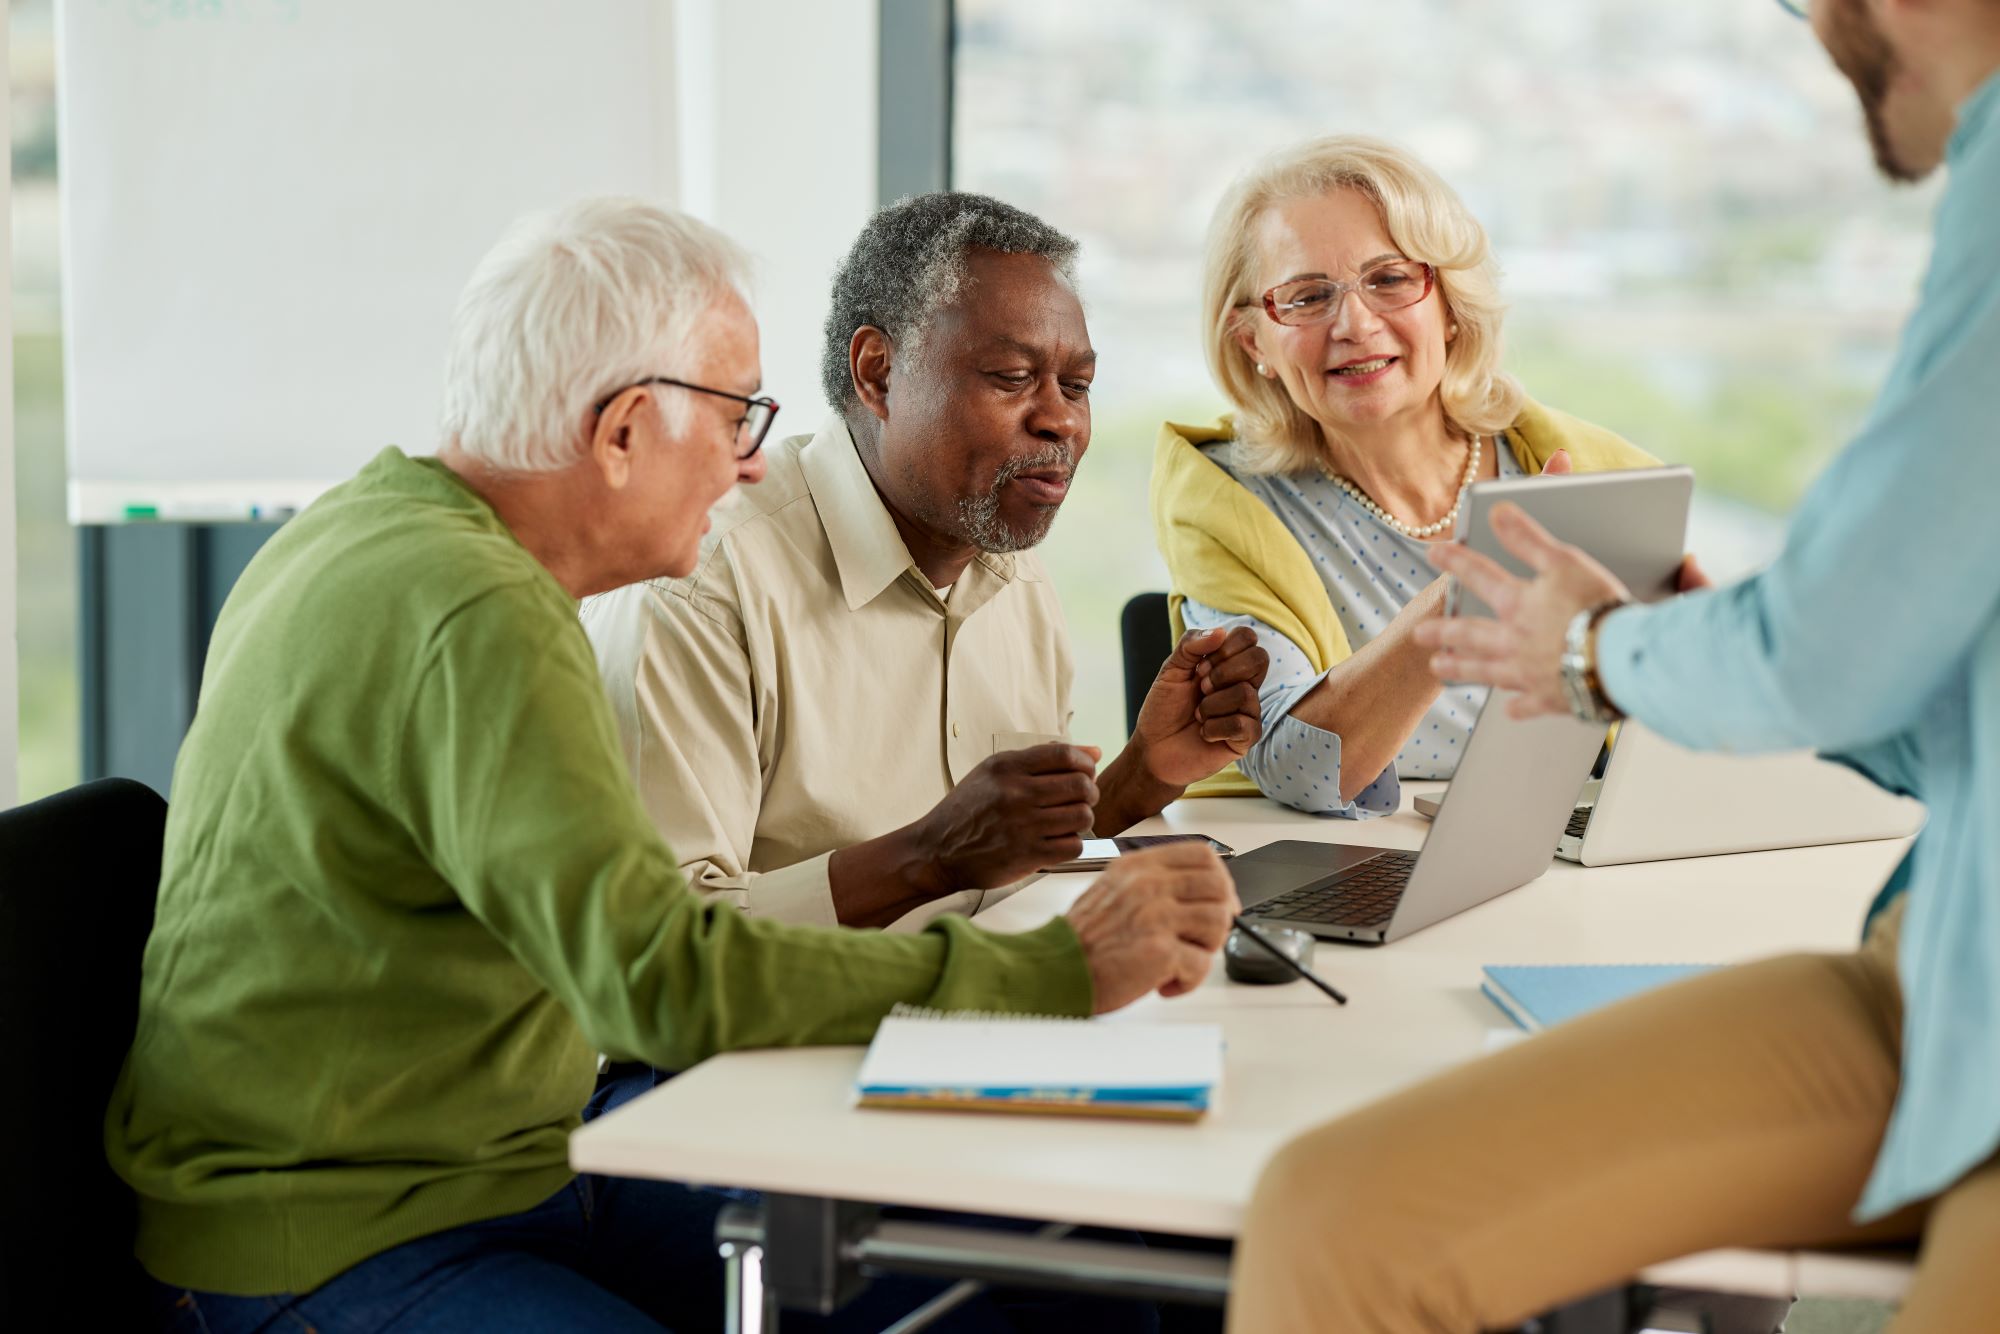 5 Best Places to Find Adult Education Programs for Seniors & Retirees